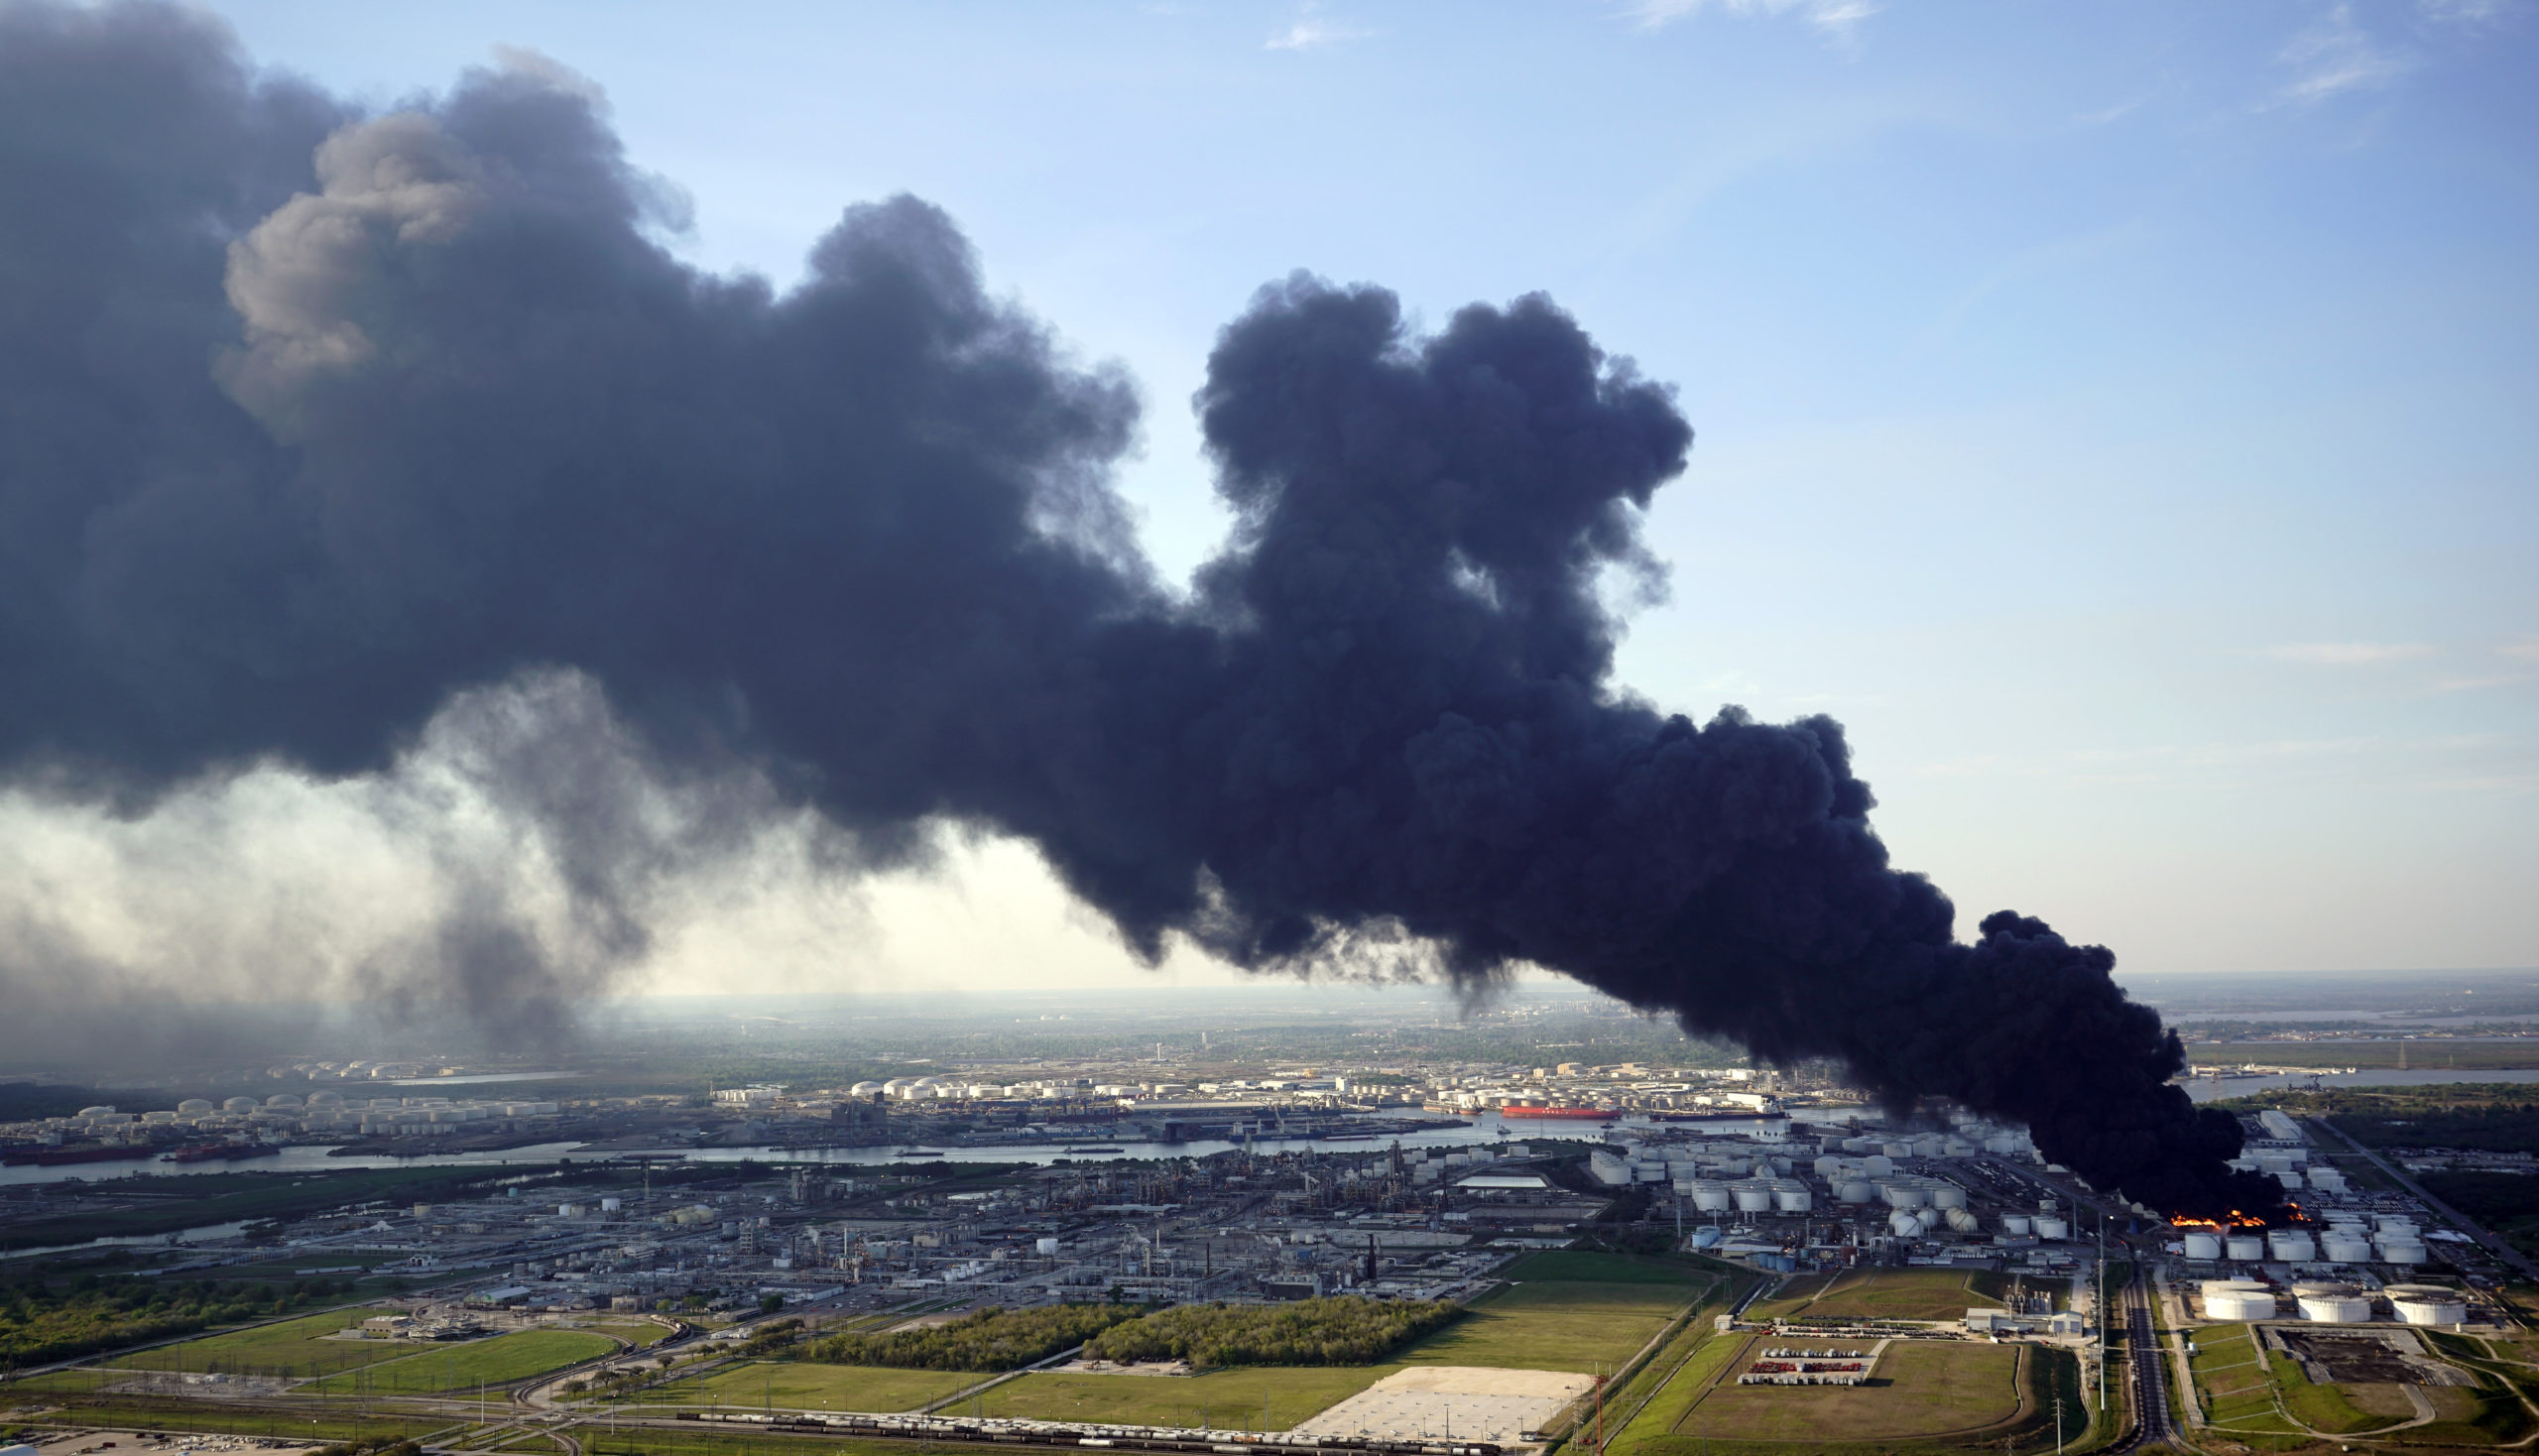 In this March 18, 2019 file photo, a plume of smoke rises from a petrochemical fire at the Intercontinental Terminals Company in Deer Park, Texas. (AP Photo/David J. Phillip, File)